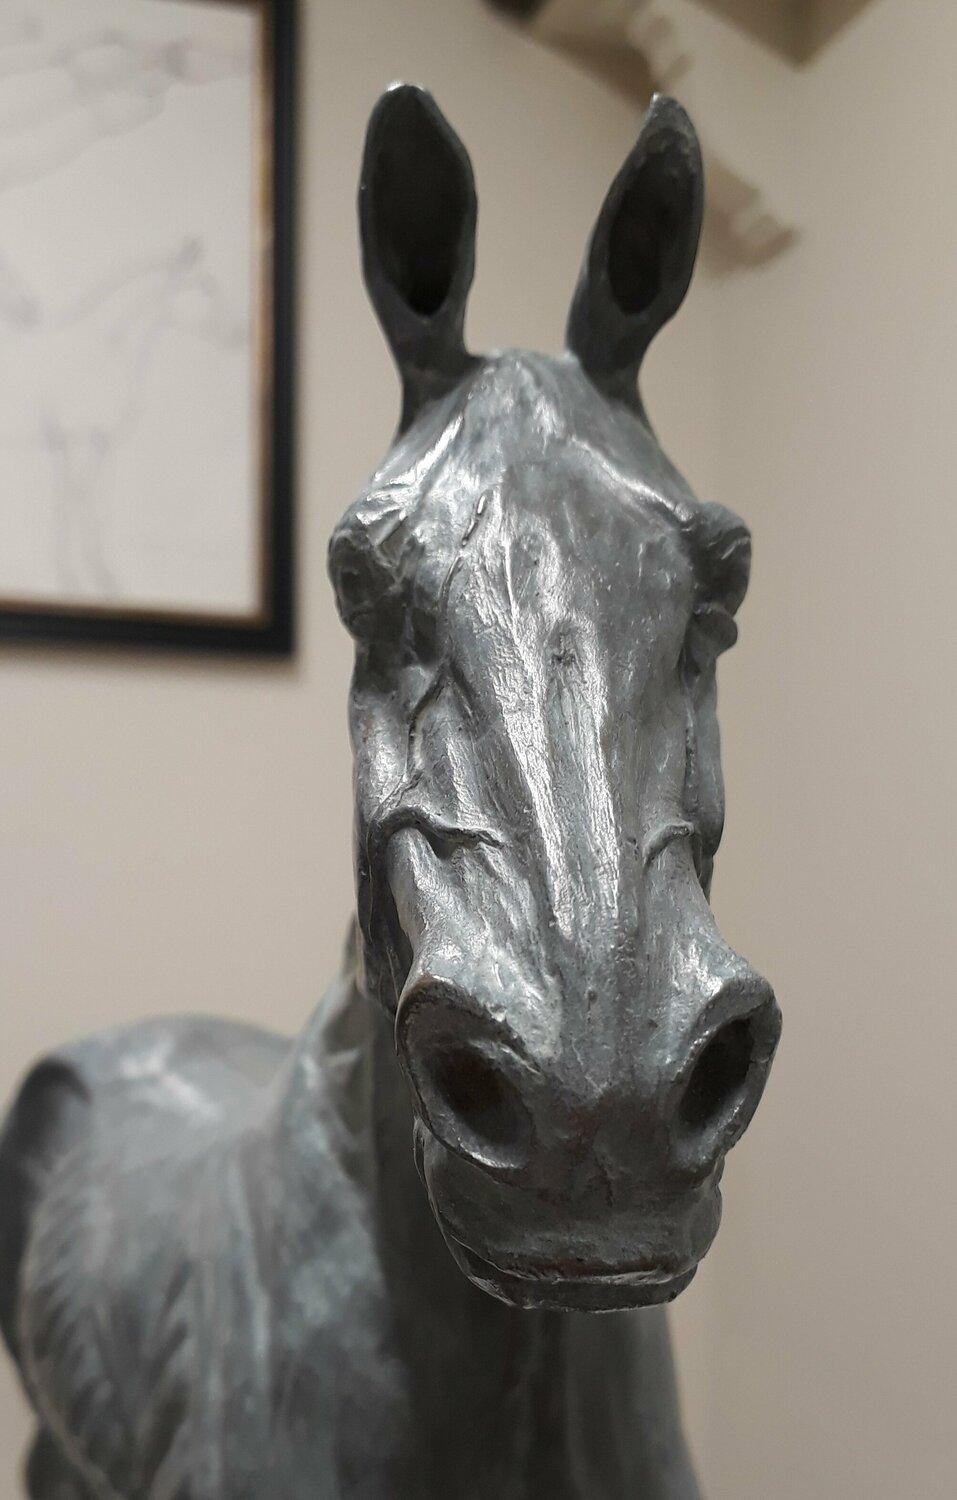 Passionate about anatomy and the natural form, Davies modelled this hunter/thoroughbred type horse in a way that exhibits the inherent  beauty of its skeletal shape and musculature, where anatomy and artistic interpretation work together in harmony